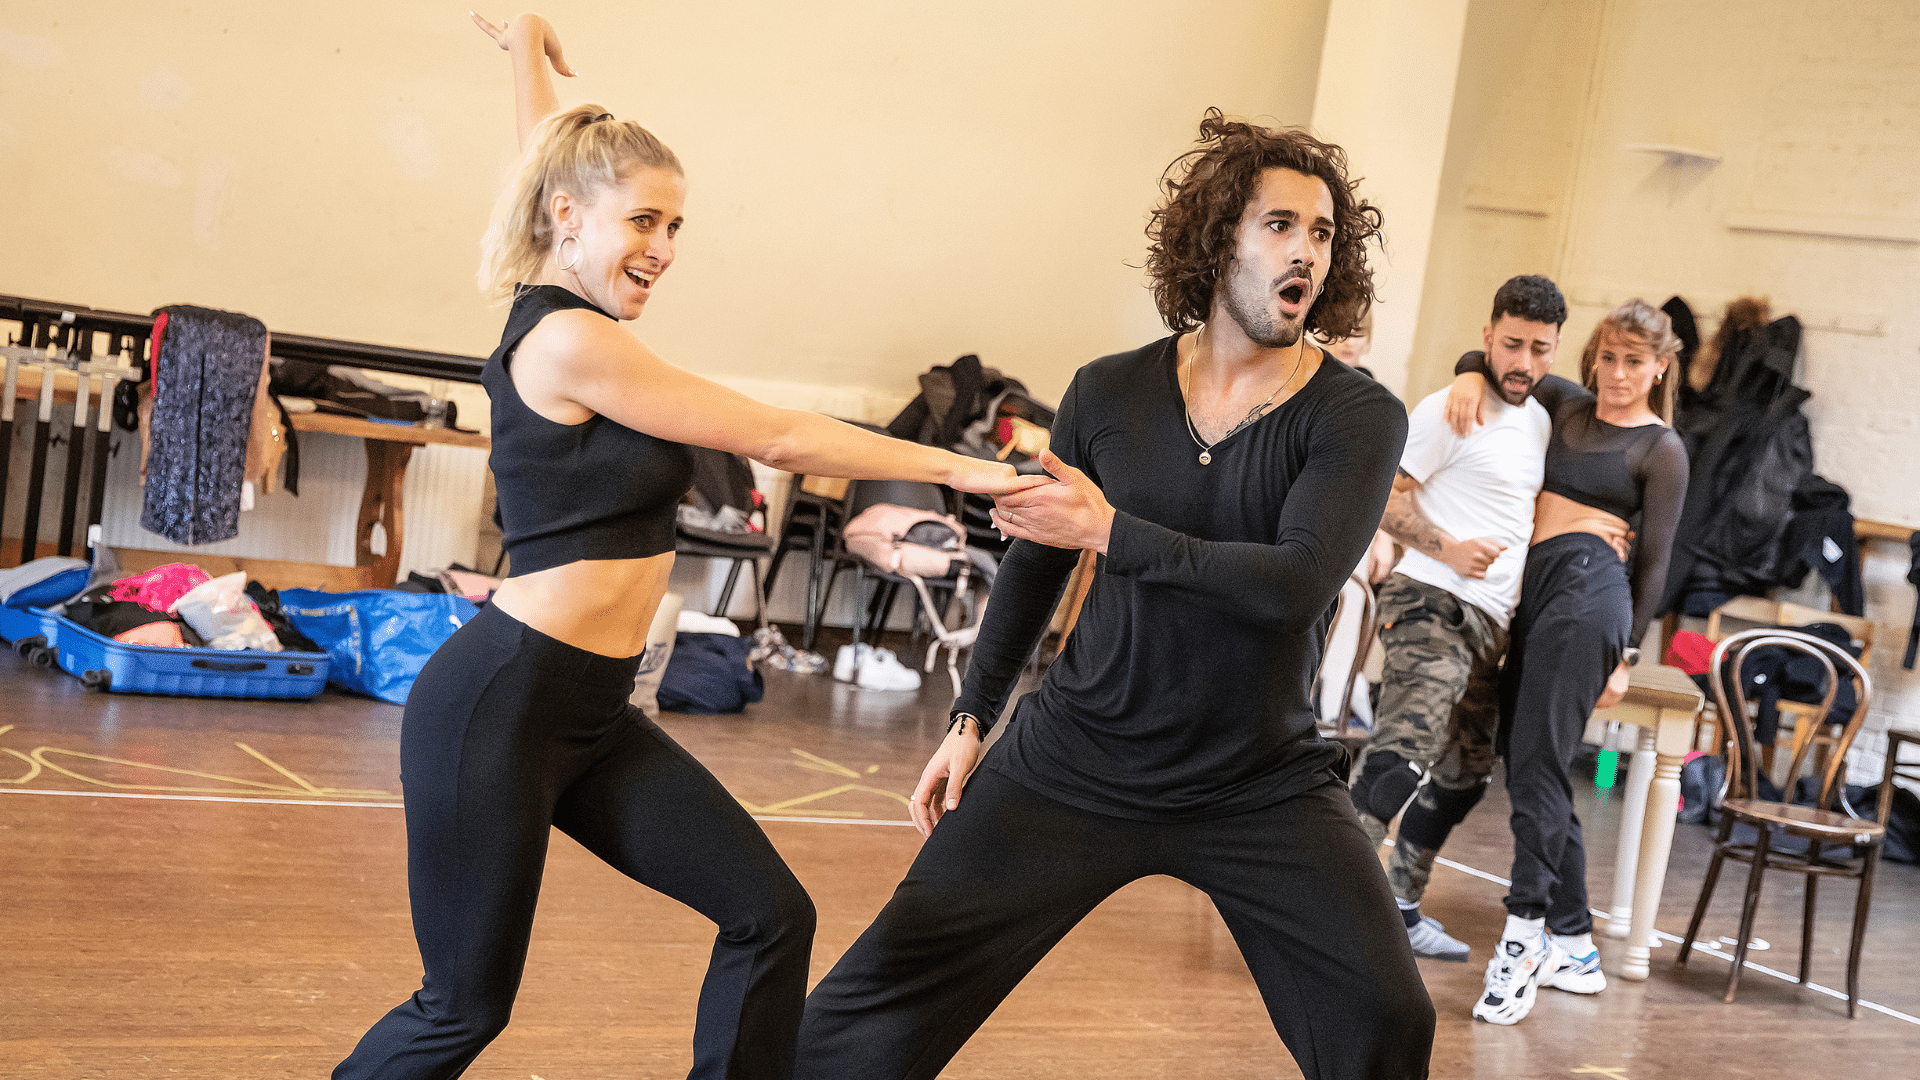 Rehearsal photo. Graziano Di Prima, dressed in all black, clasps hands with a blonde female partner. She is smiling widely, he is gaping open-mouthed.